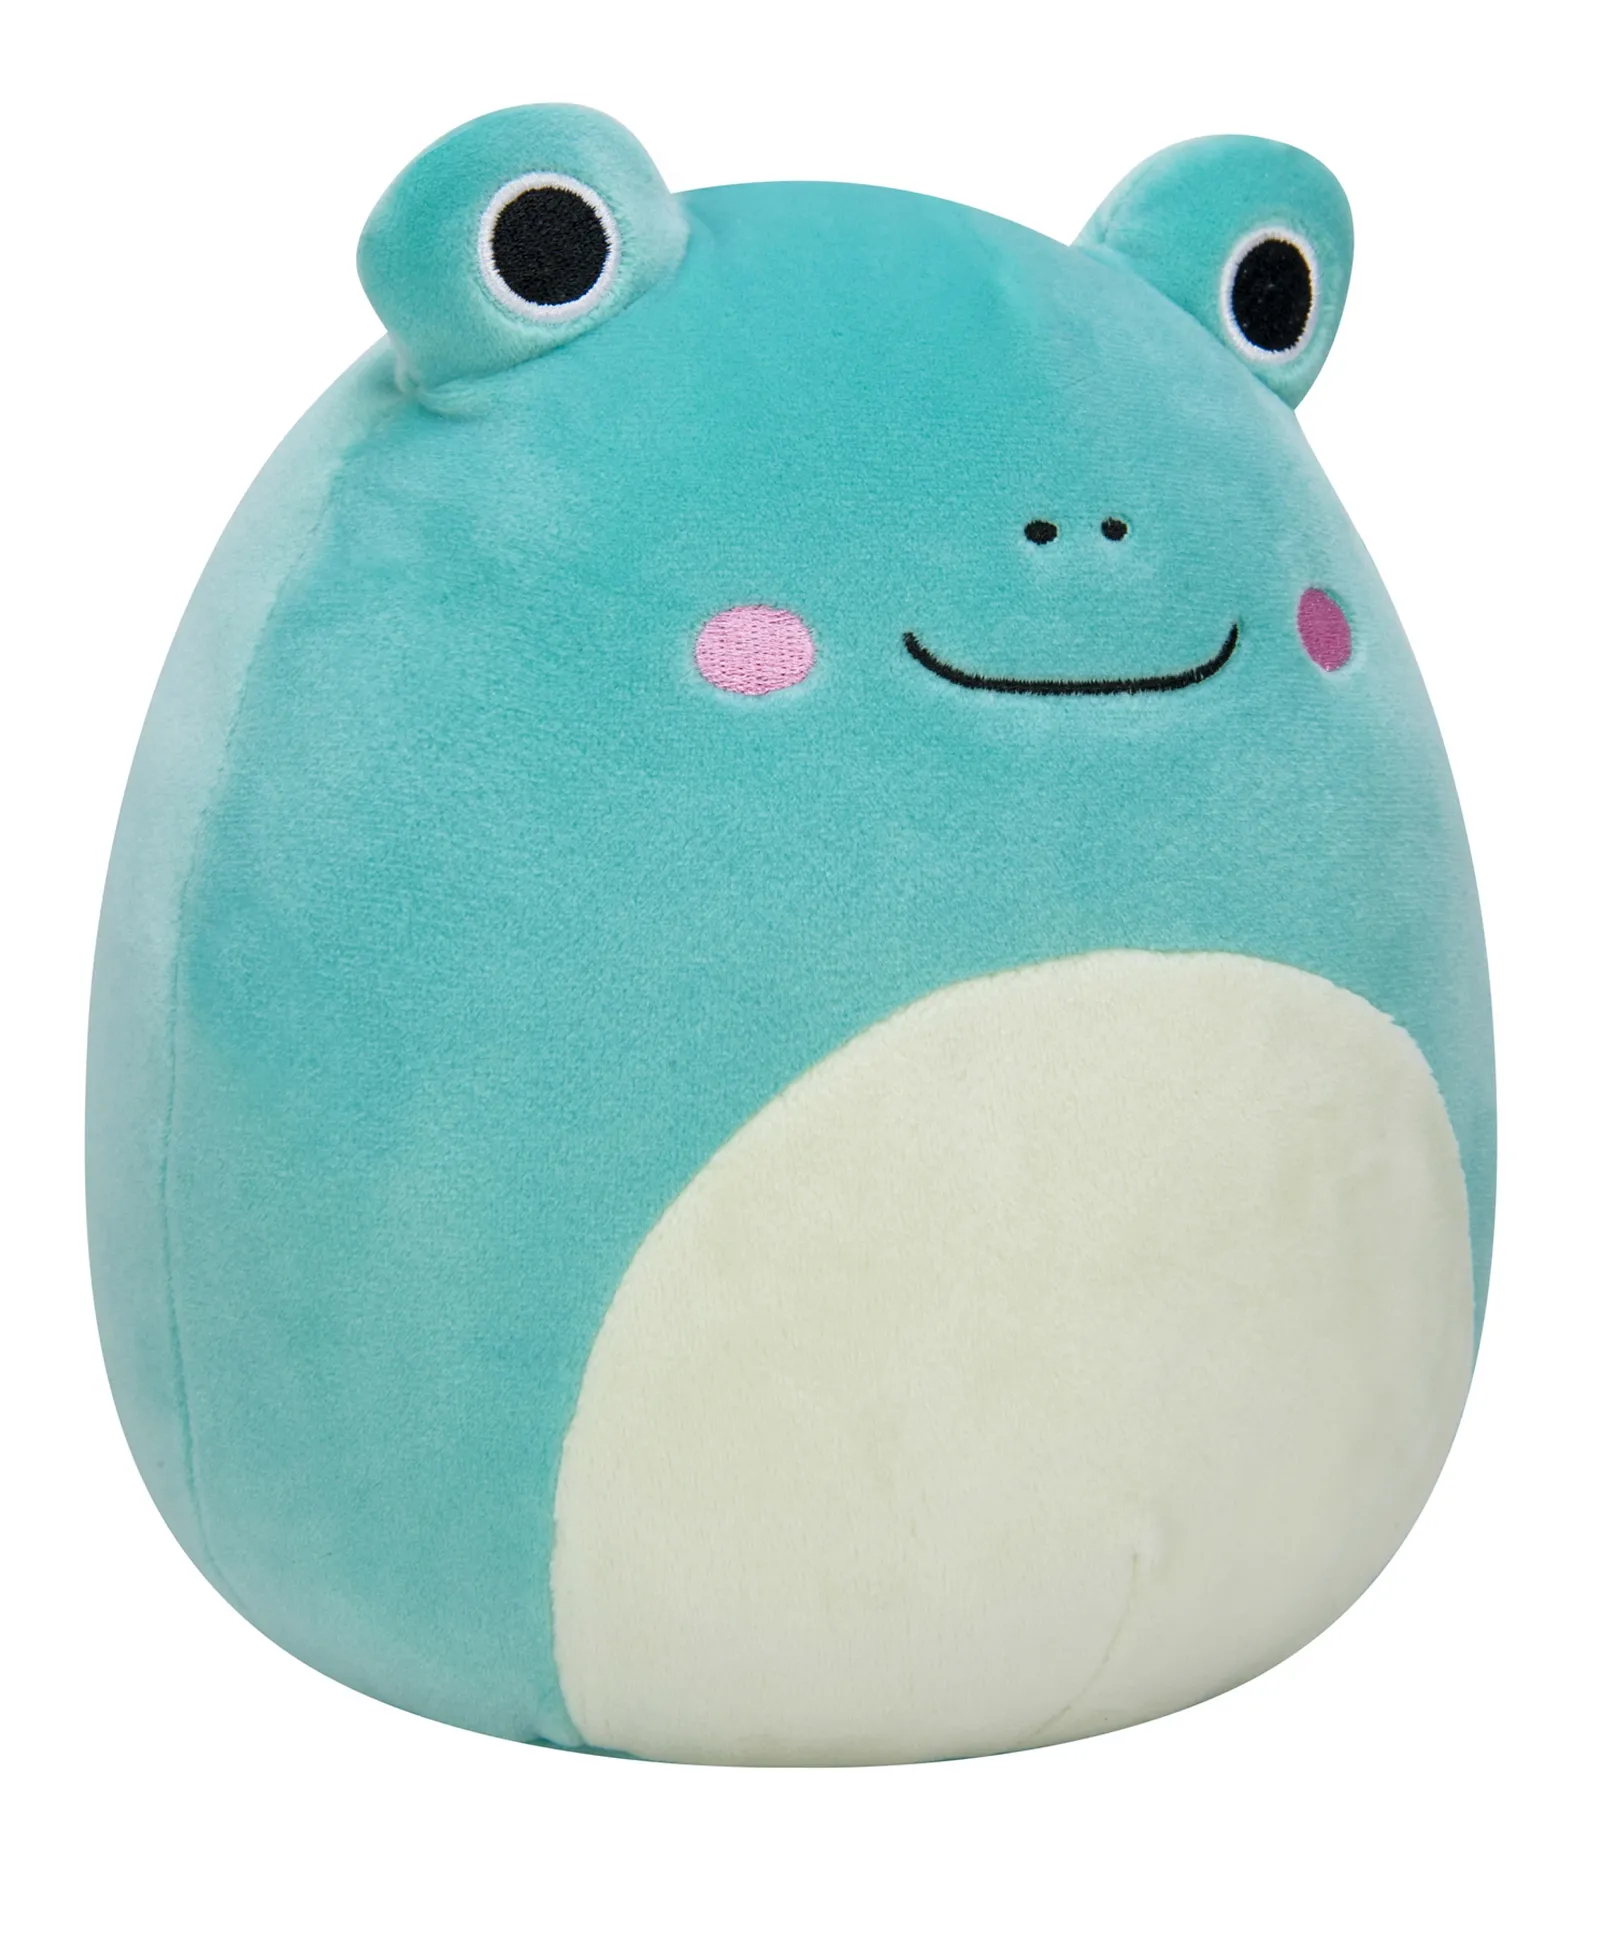 Squishmallows Robert the Aqua Frog with Blush and Light Green Belly ...